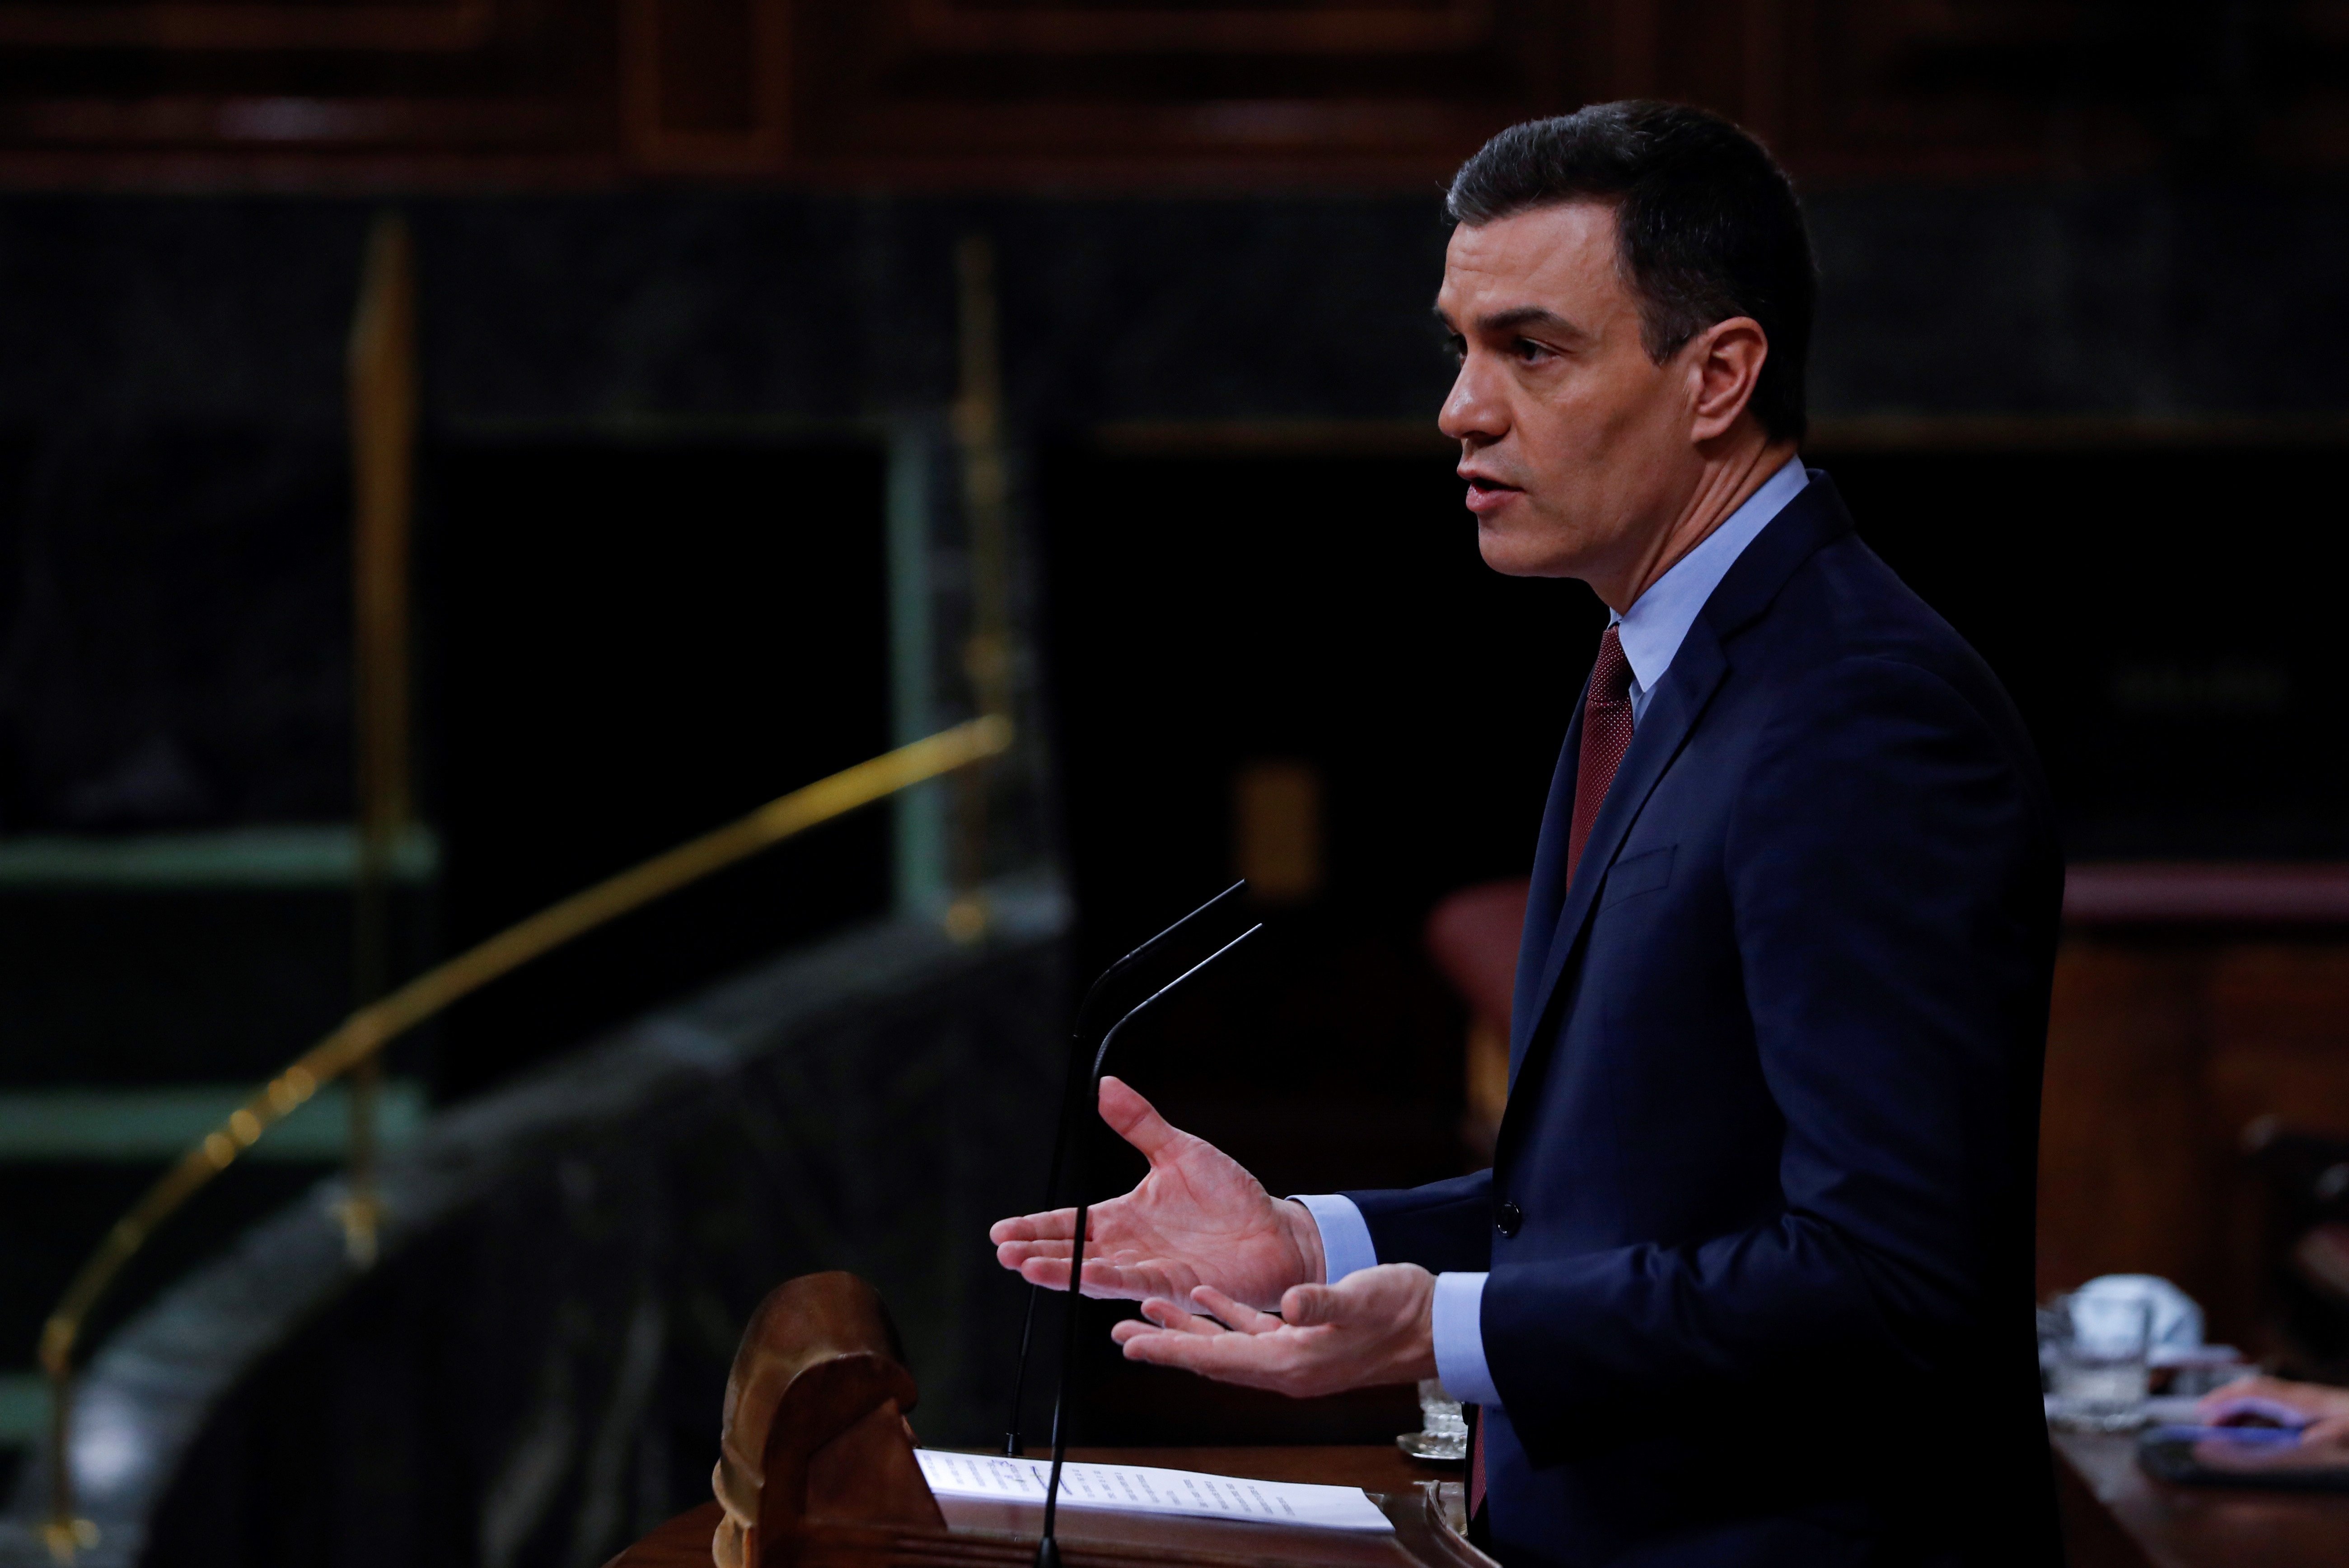 Sánchez proposes one month extension of state of alarm, in return for concessions